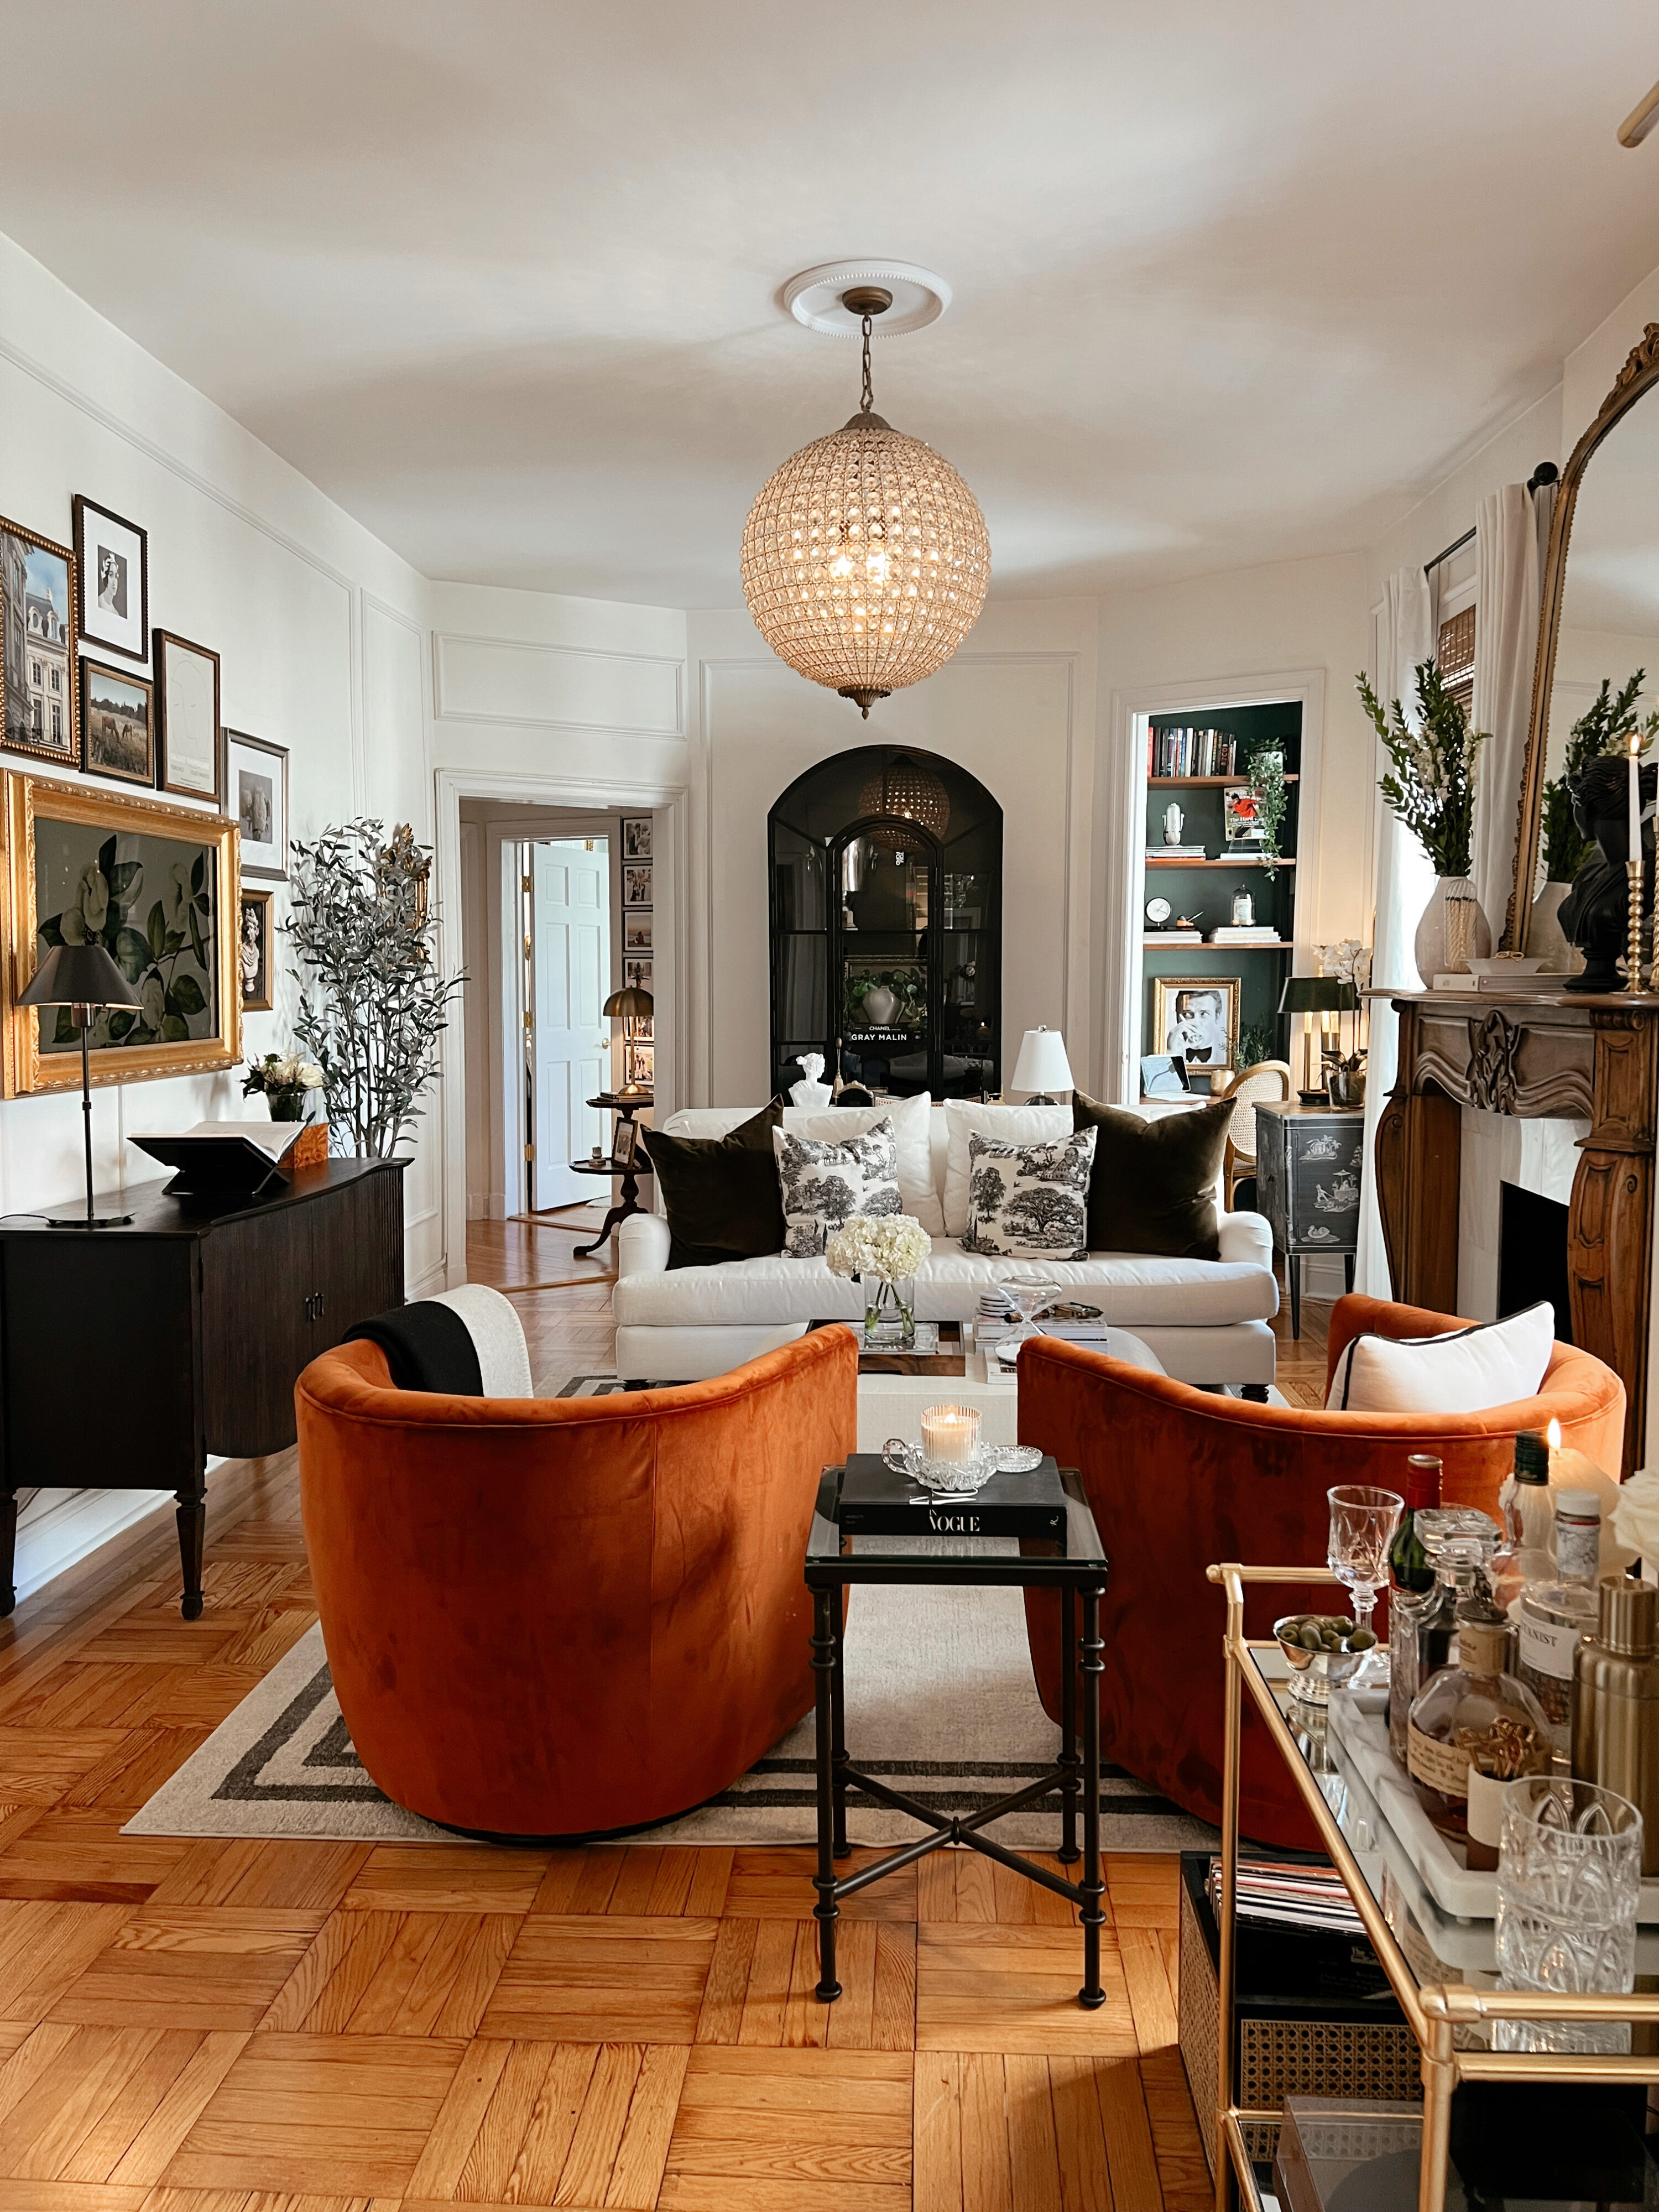 Anna Page's living room with two large orange chairs as the centerpieces of the room.